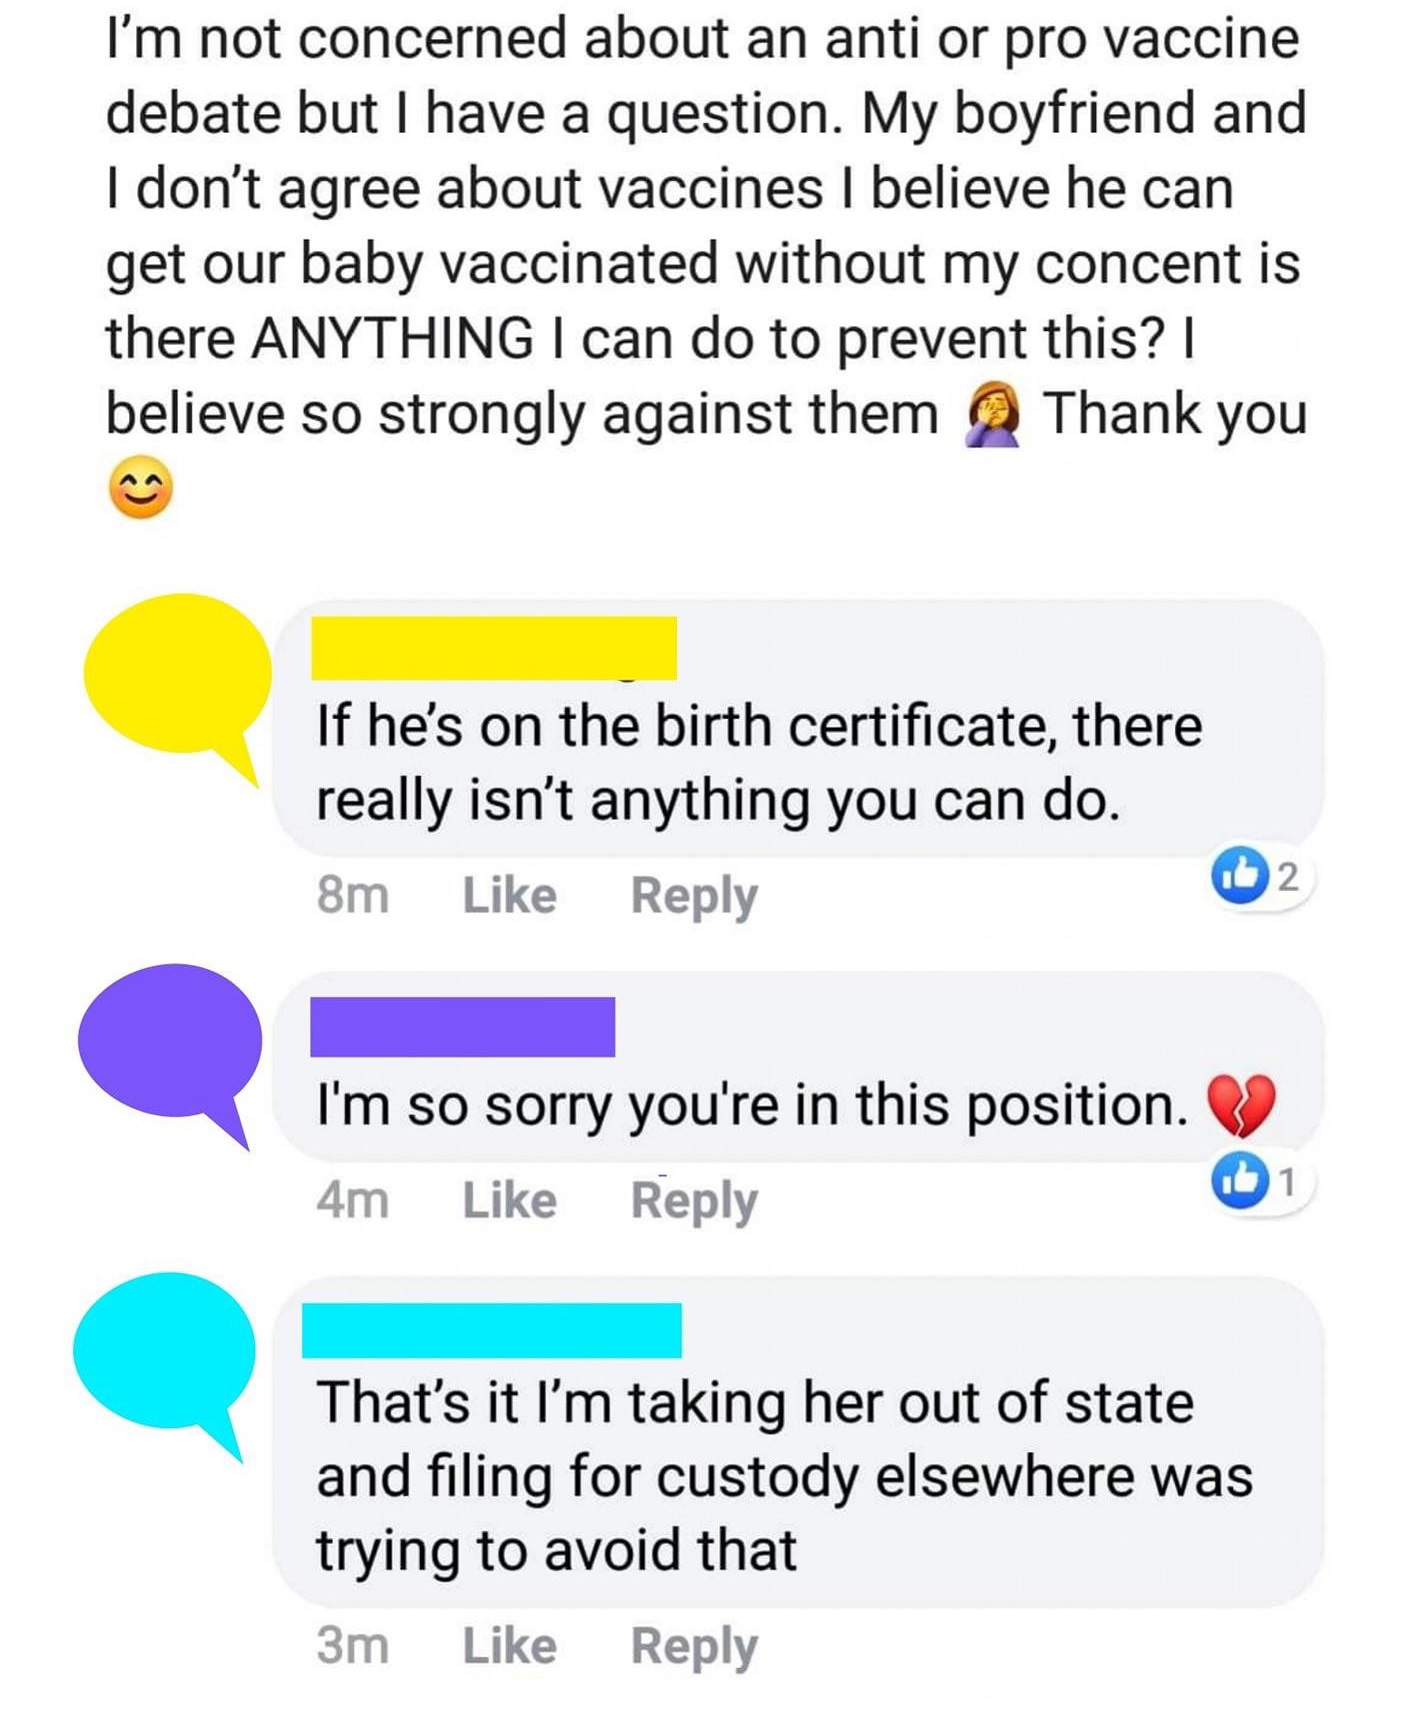 I'm not concerned about an anti or pro vaccine debate but I have a question. My boyfriend and I don't agree about vaccines I believe he can get our baby vaccinated without my concent is there Anything I can do to prevent this? | believe so strongly agains